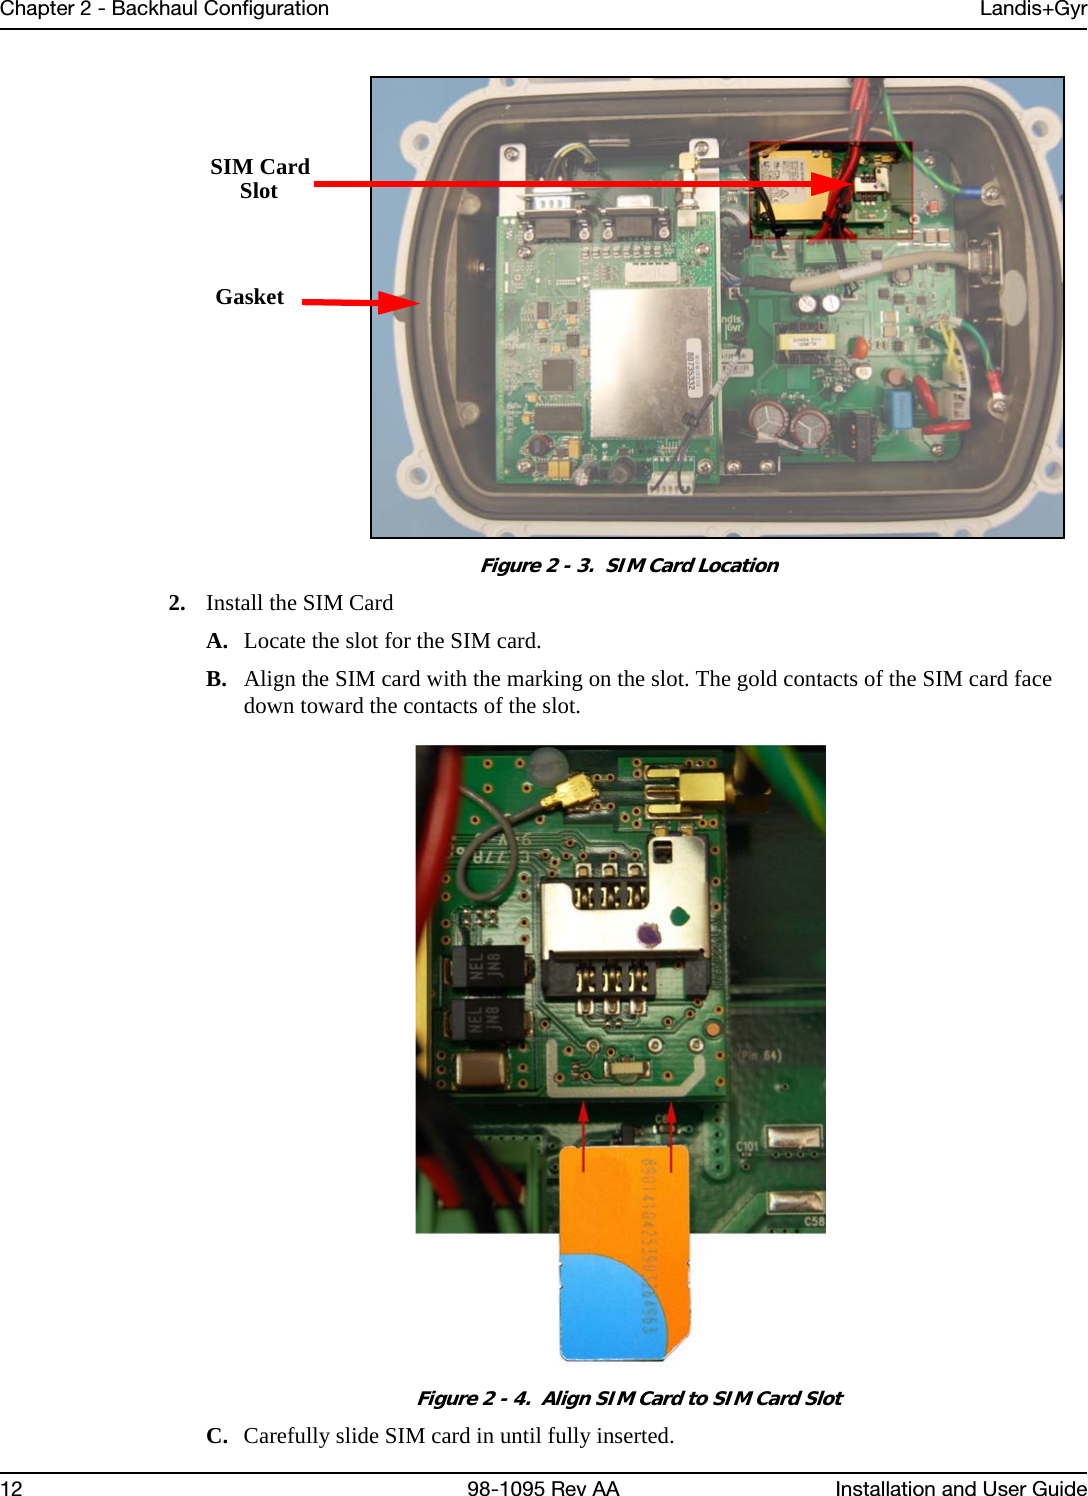 Chapter 2 - Backhaul Configuration Landis+Gyr12 98-1095 Rev AA Installation and User GuideFigure 2 - 3.  SIM Card Location2. Install the SIM CardA. Locate the slot for the SIM card.B. Align the SIM card with the marking on the slot. The gold contacts of the SIM card face down toward the contacts of the slot.Figure 2 - 4.  Align SIM Card to SIM Card SlotC. Carefully slide SIM card in until fully inserted.GasketSIM CardSlot